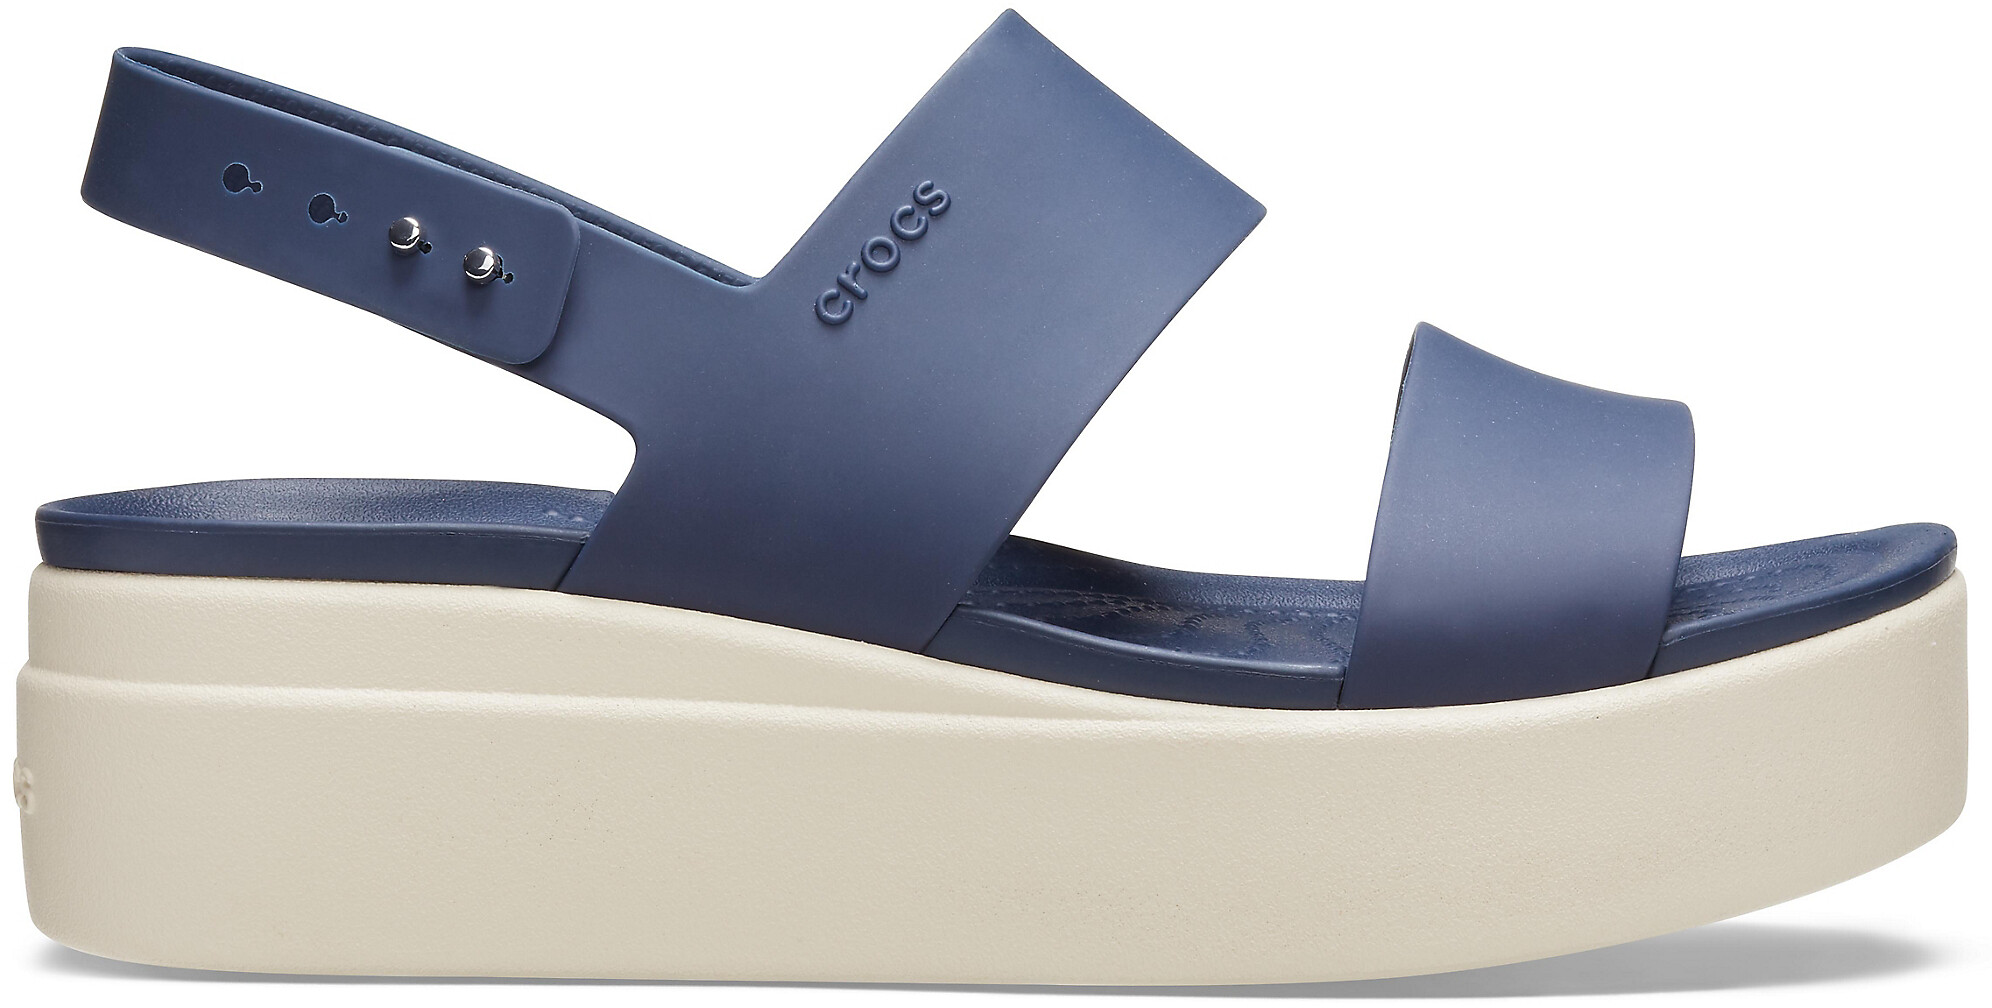 Crocs Brooklyn Low Wedge Shoes Women navy/stucco at addnature.co.uk